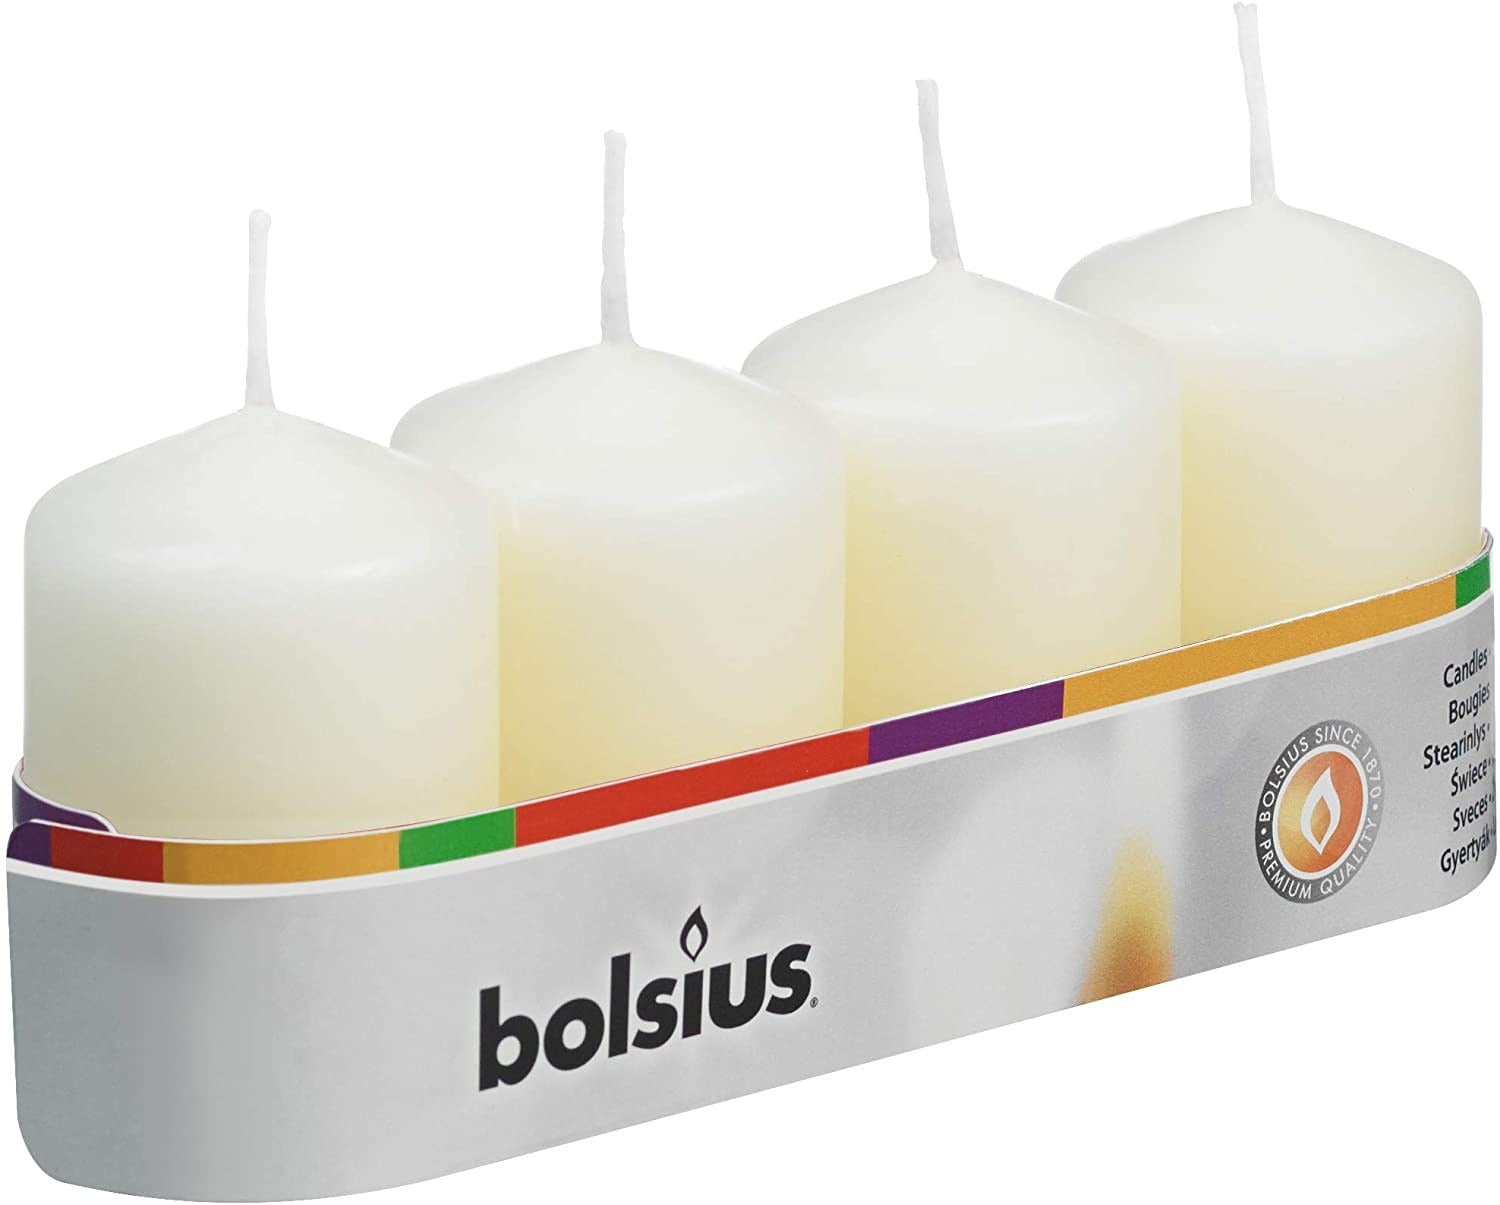 View Pack of 4 Bolsius Ivory Pillar Candles 60x40mm information